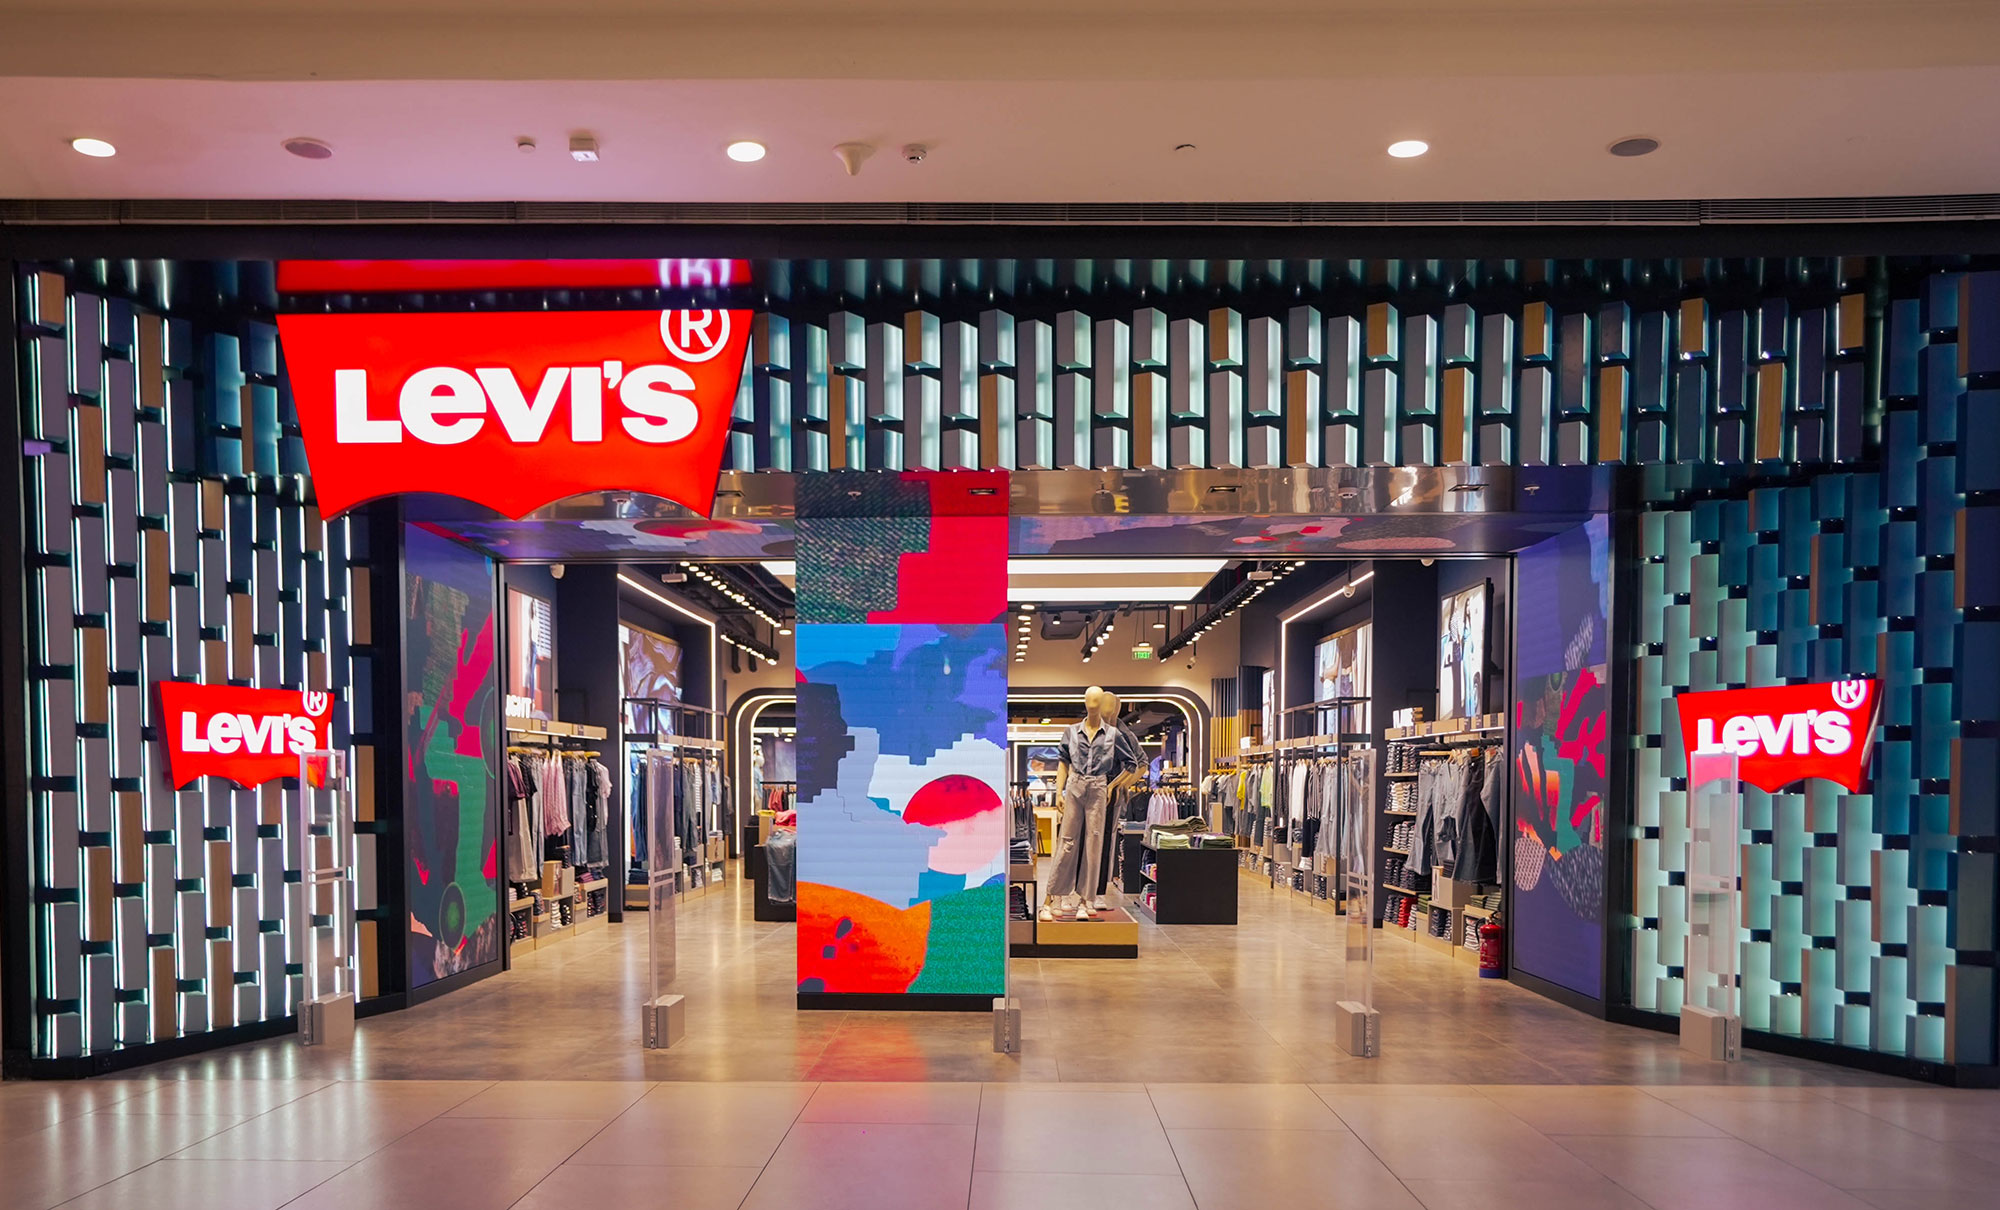 The entrance to the Levi's® store in Pacific Mall in Tagore Garden, New Dehli, featuring a large Levi's® logo above an entrance opening into an LED animation screen and assorted products.